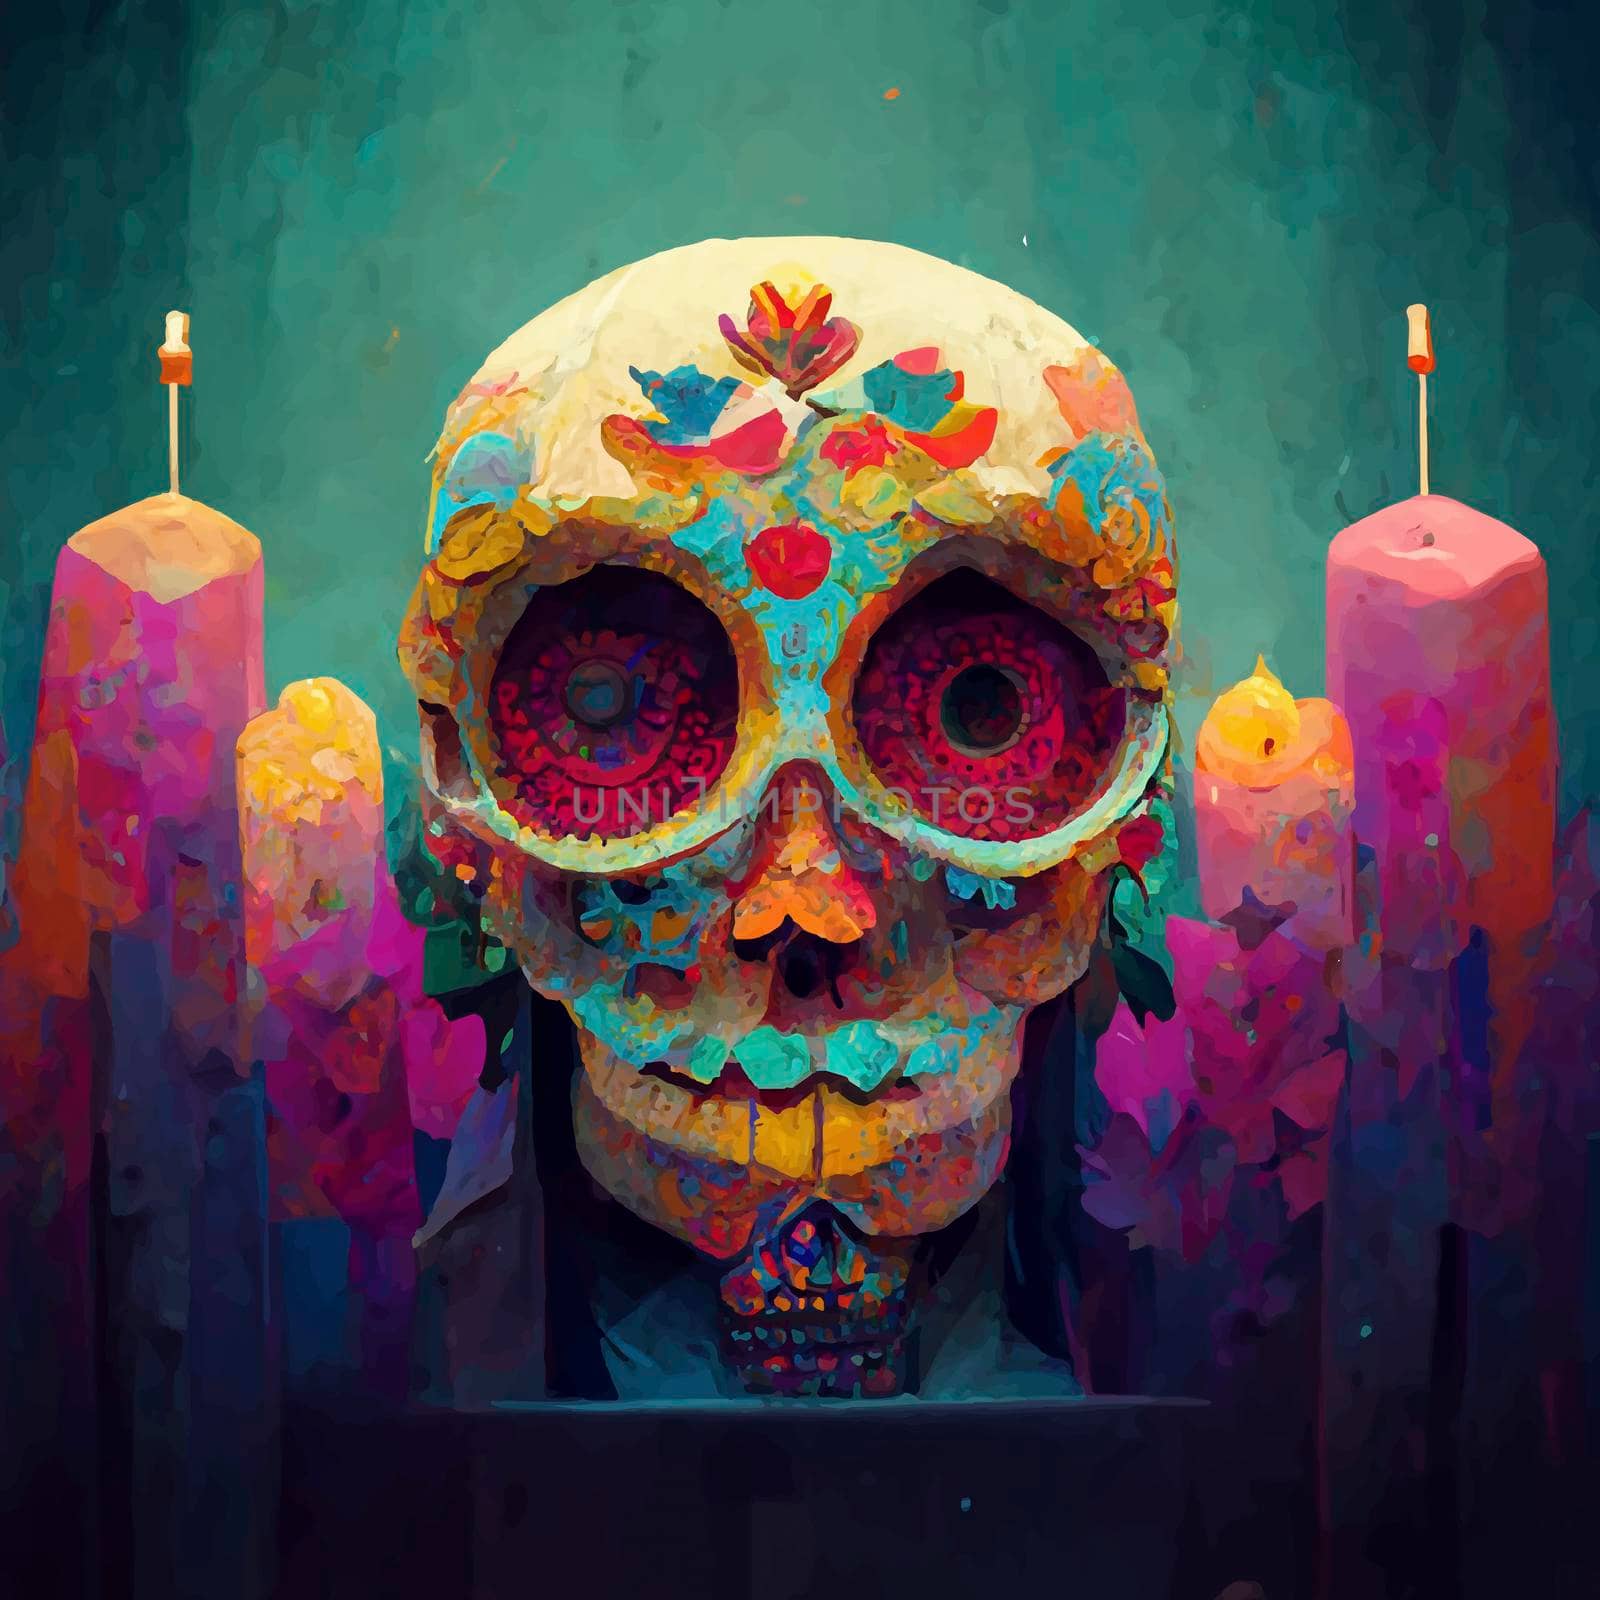 beautiful illustration of the Day of the Dead. by JpRamos